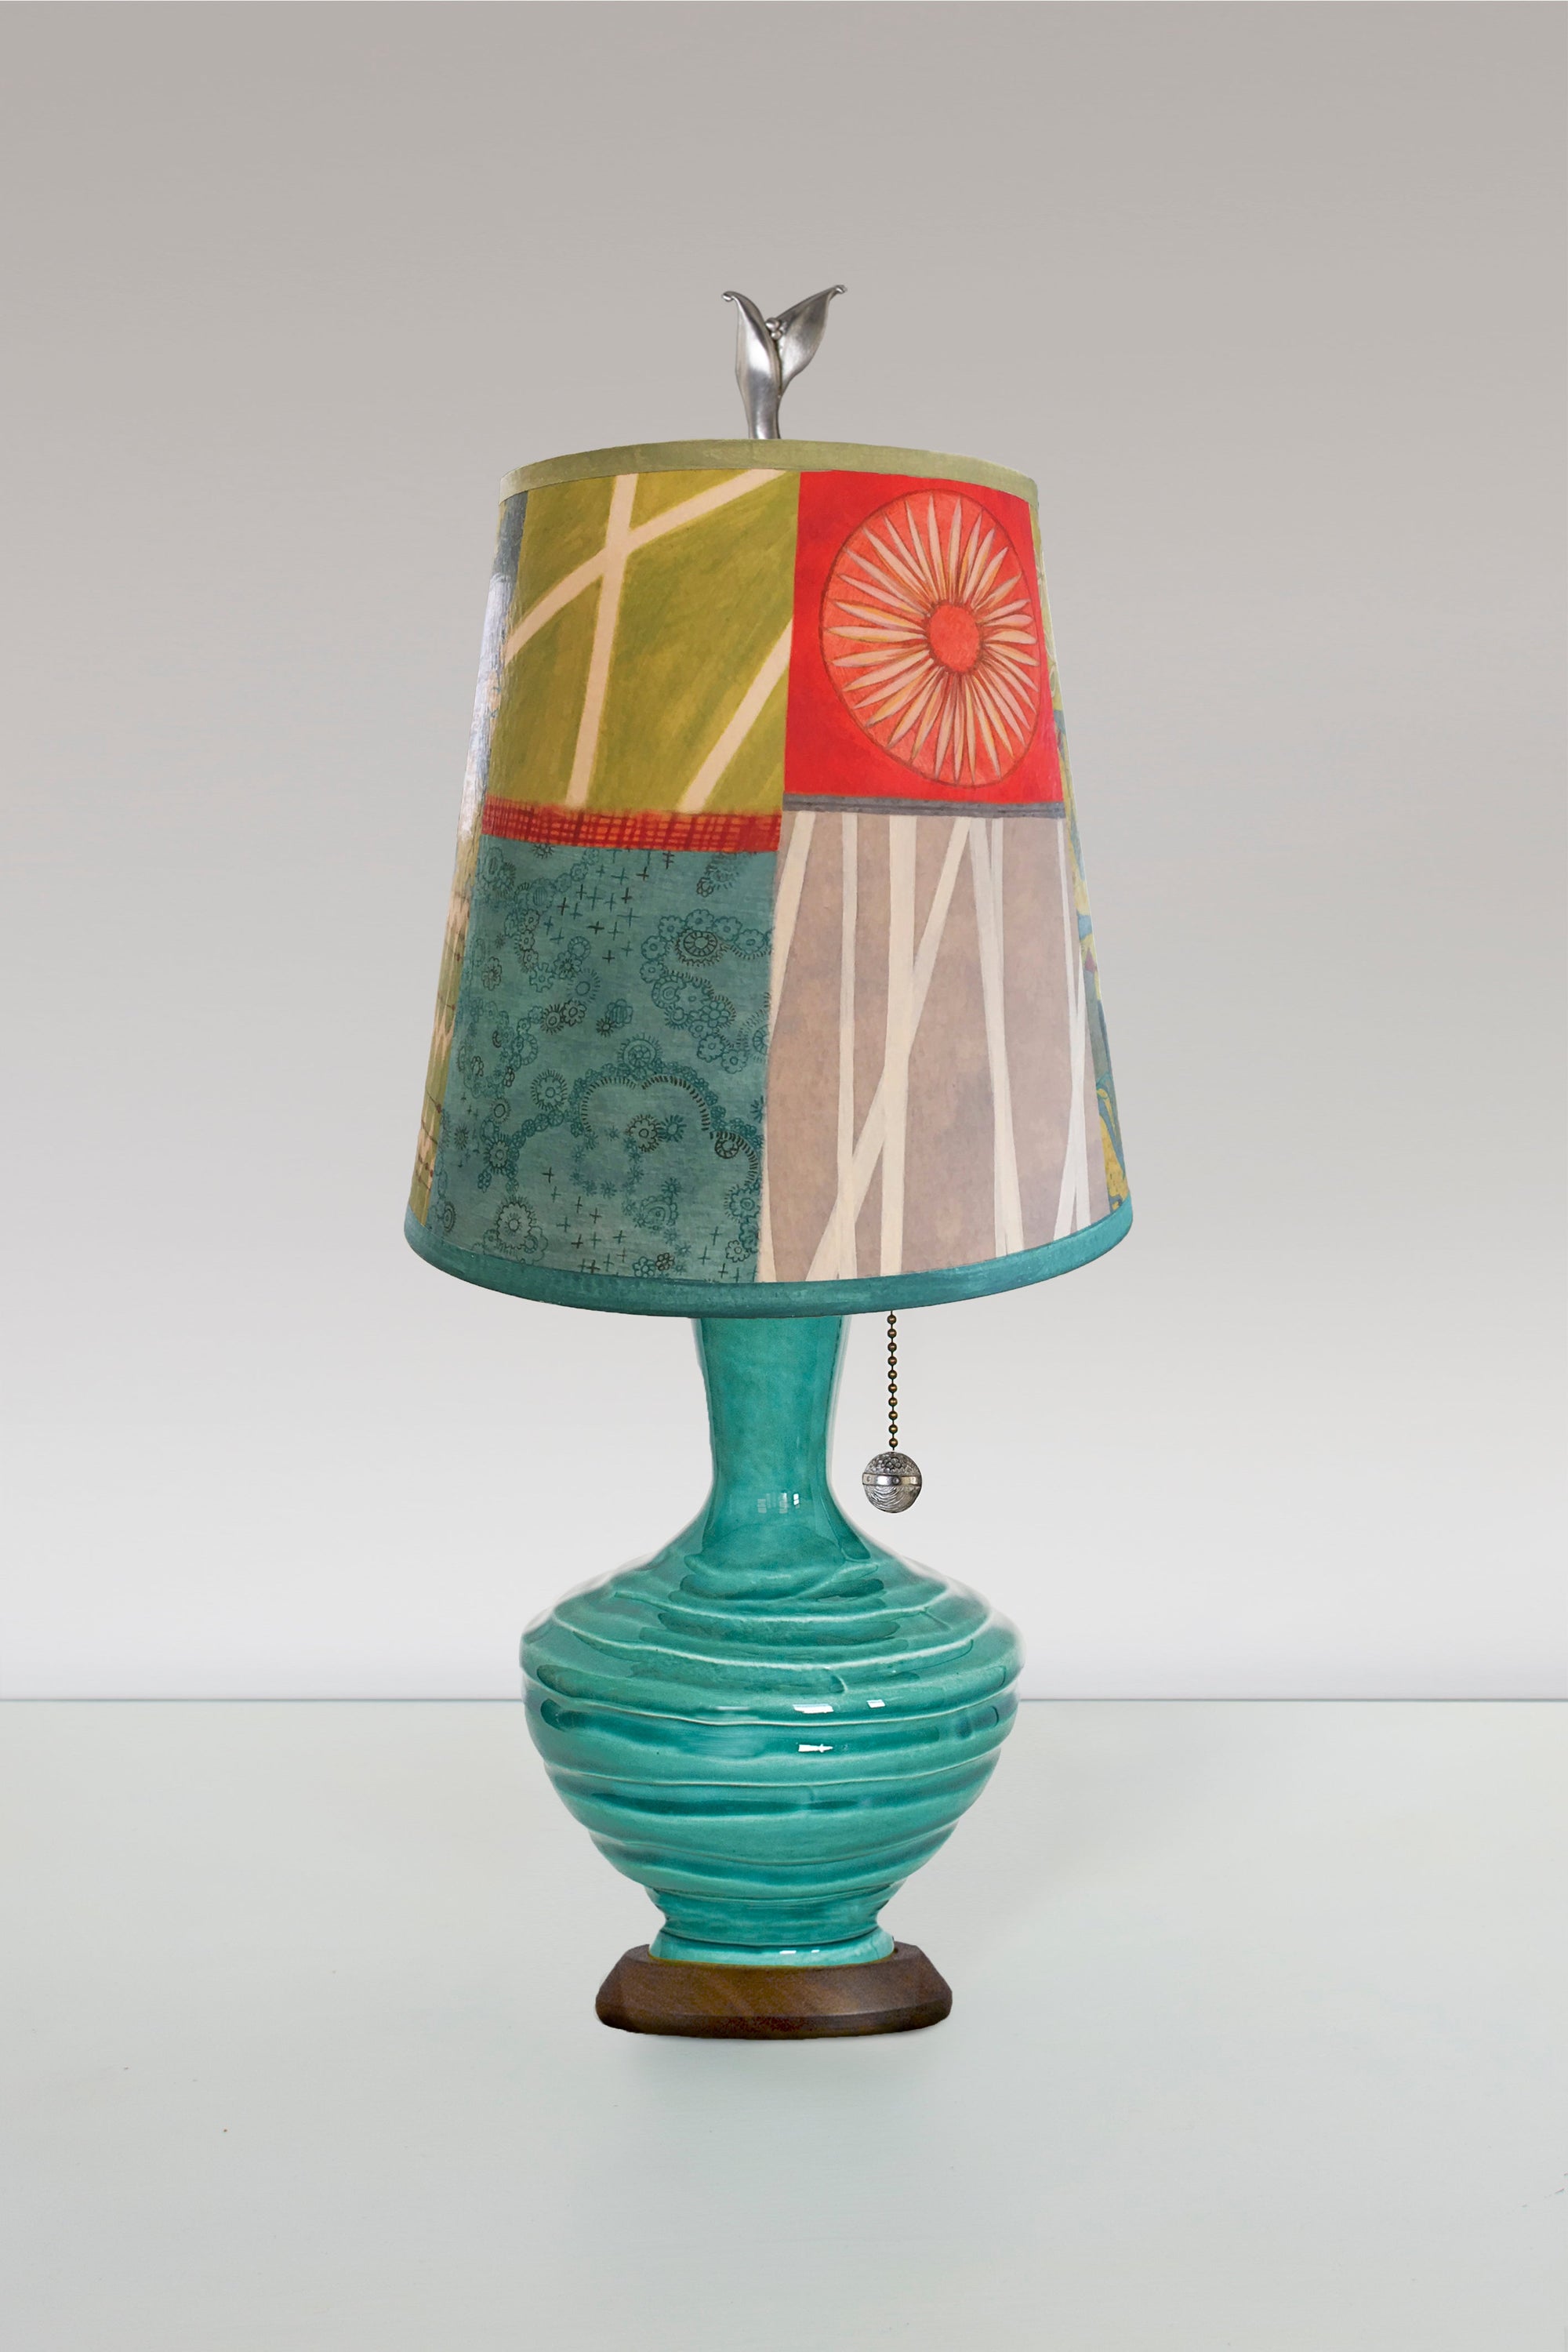 Janna Ugone & Co Table Lamps Ceramic Table Lamp with Small Drum Shade in Zest